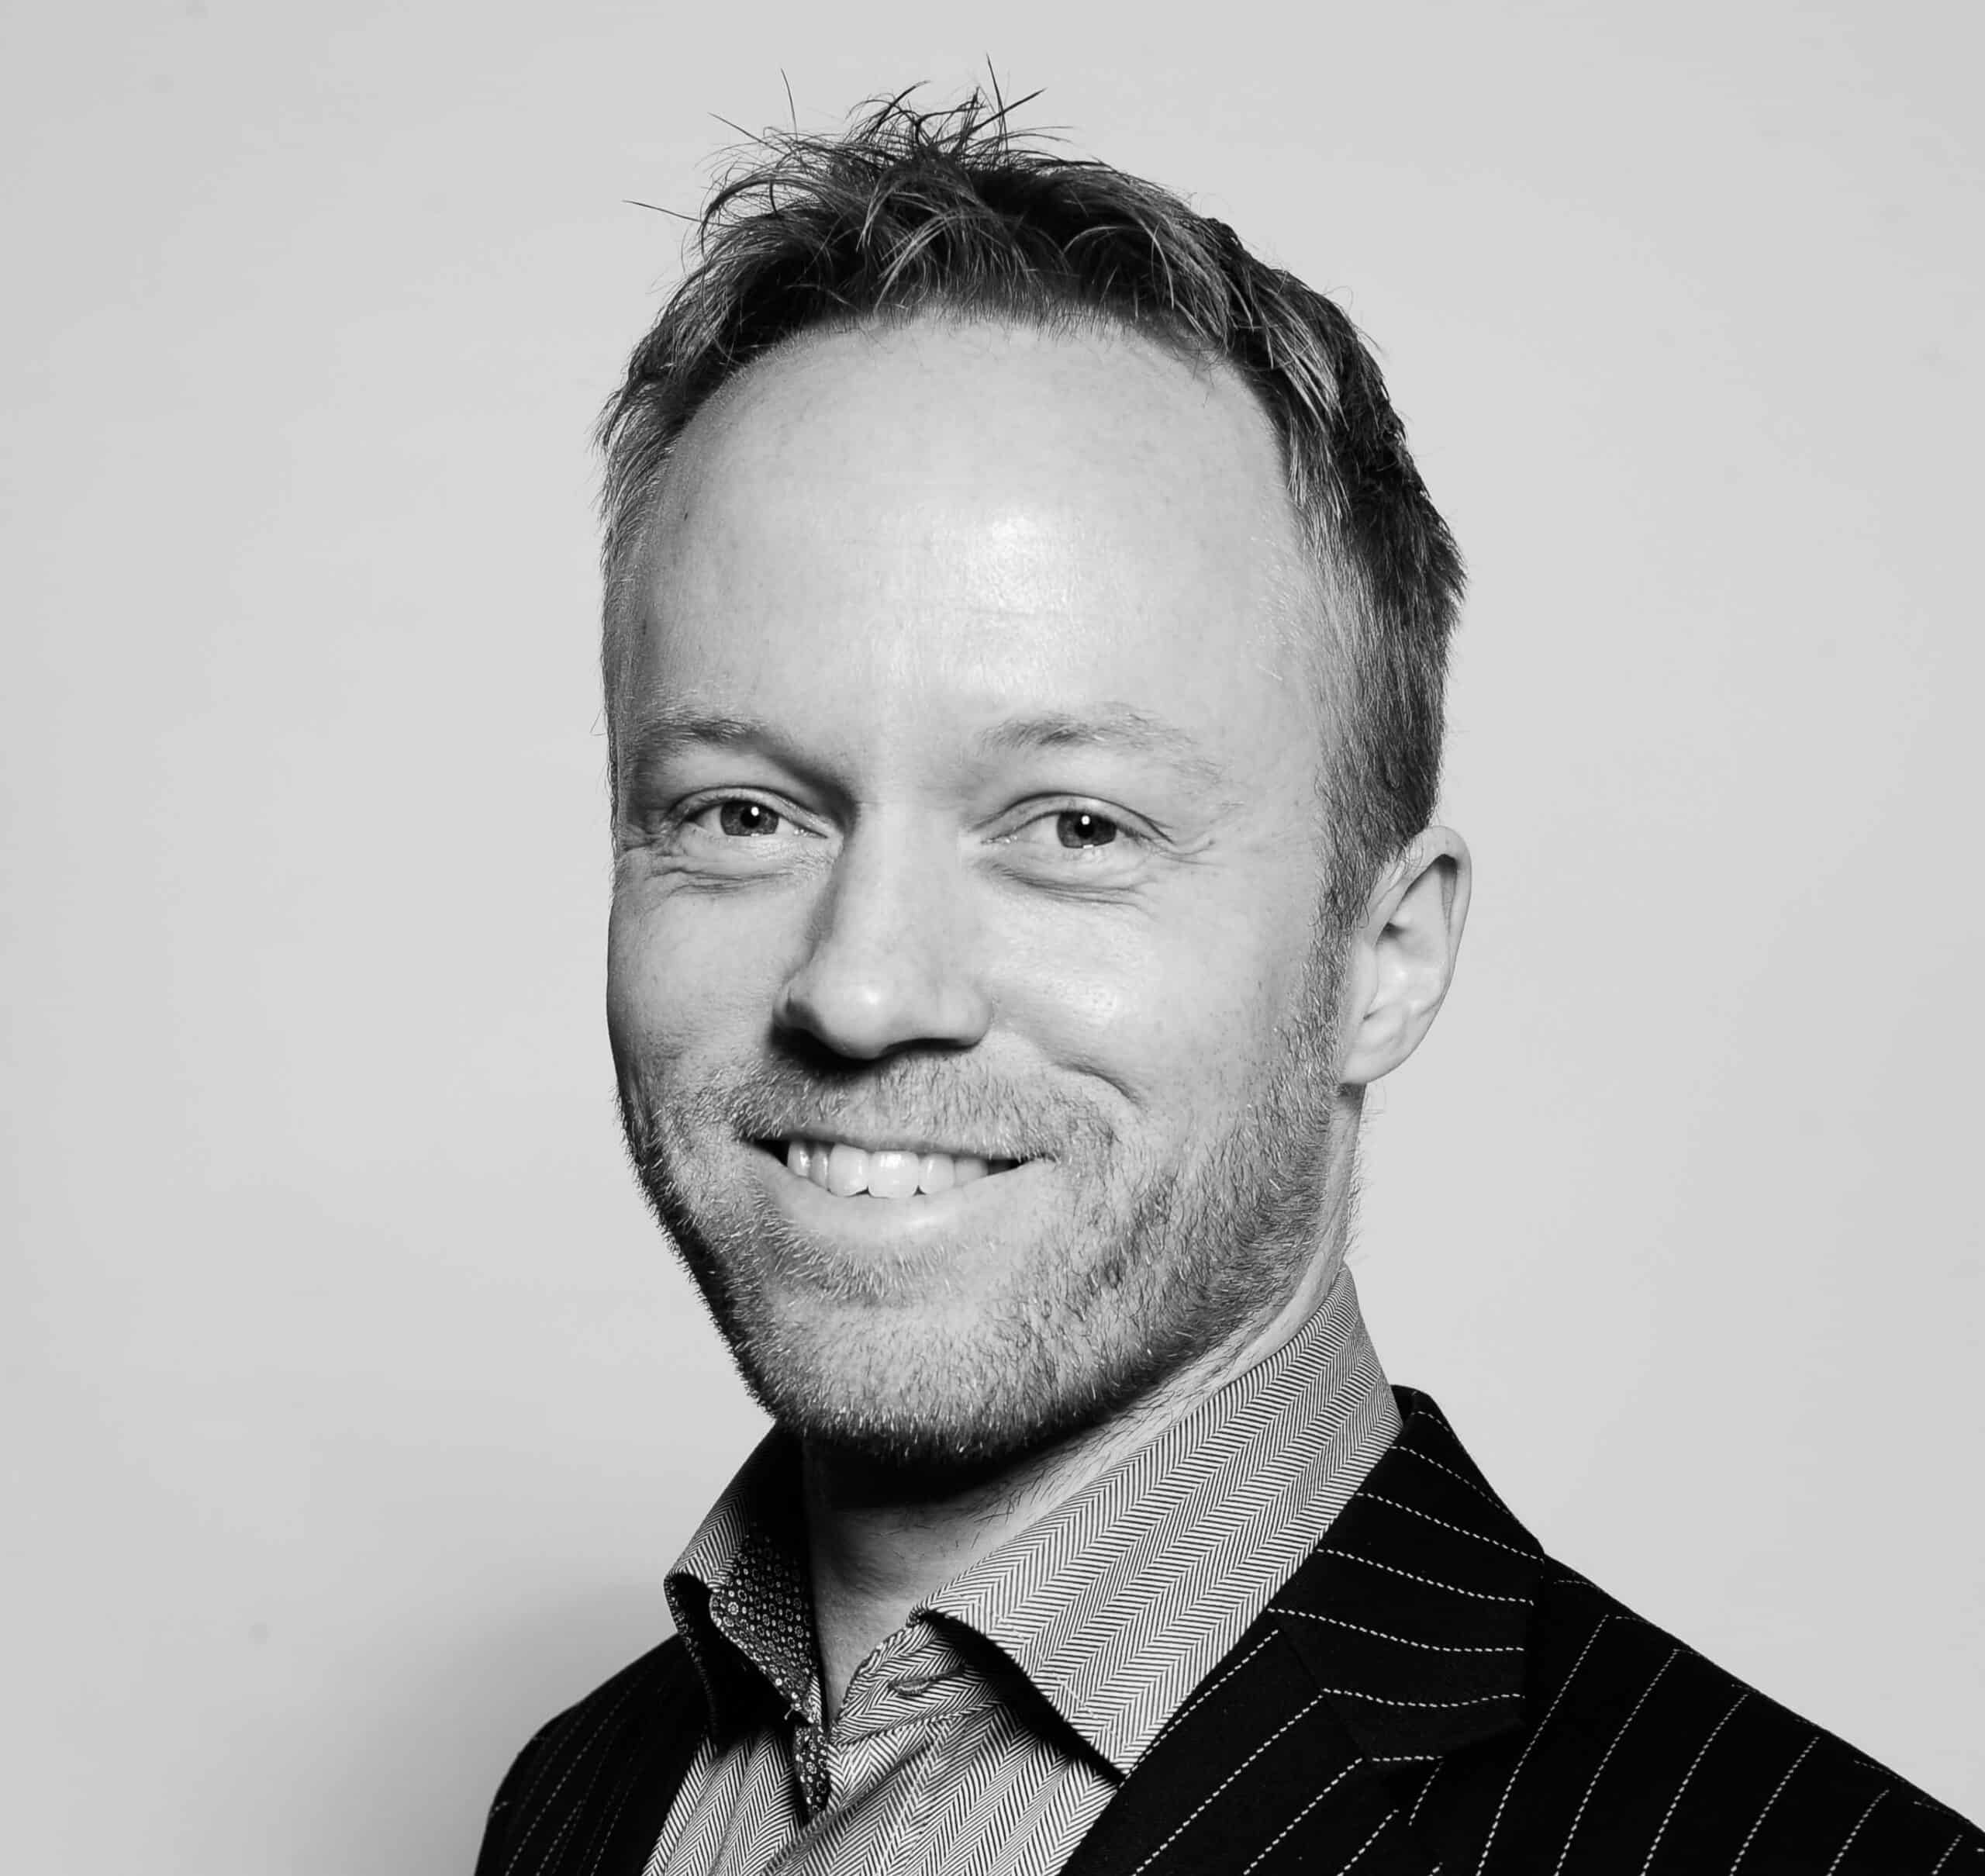 Stefan Arenbalk, chief strategy officer and co-founder of Joorschain.